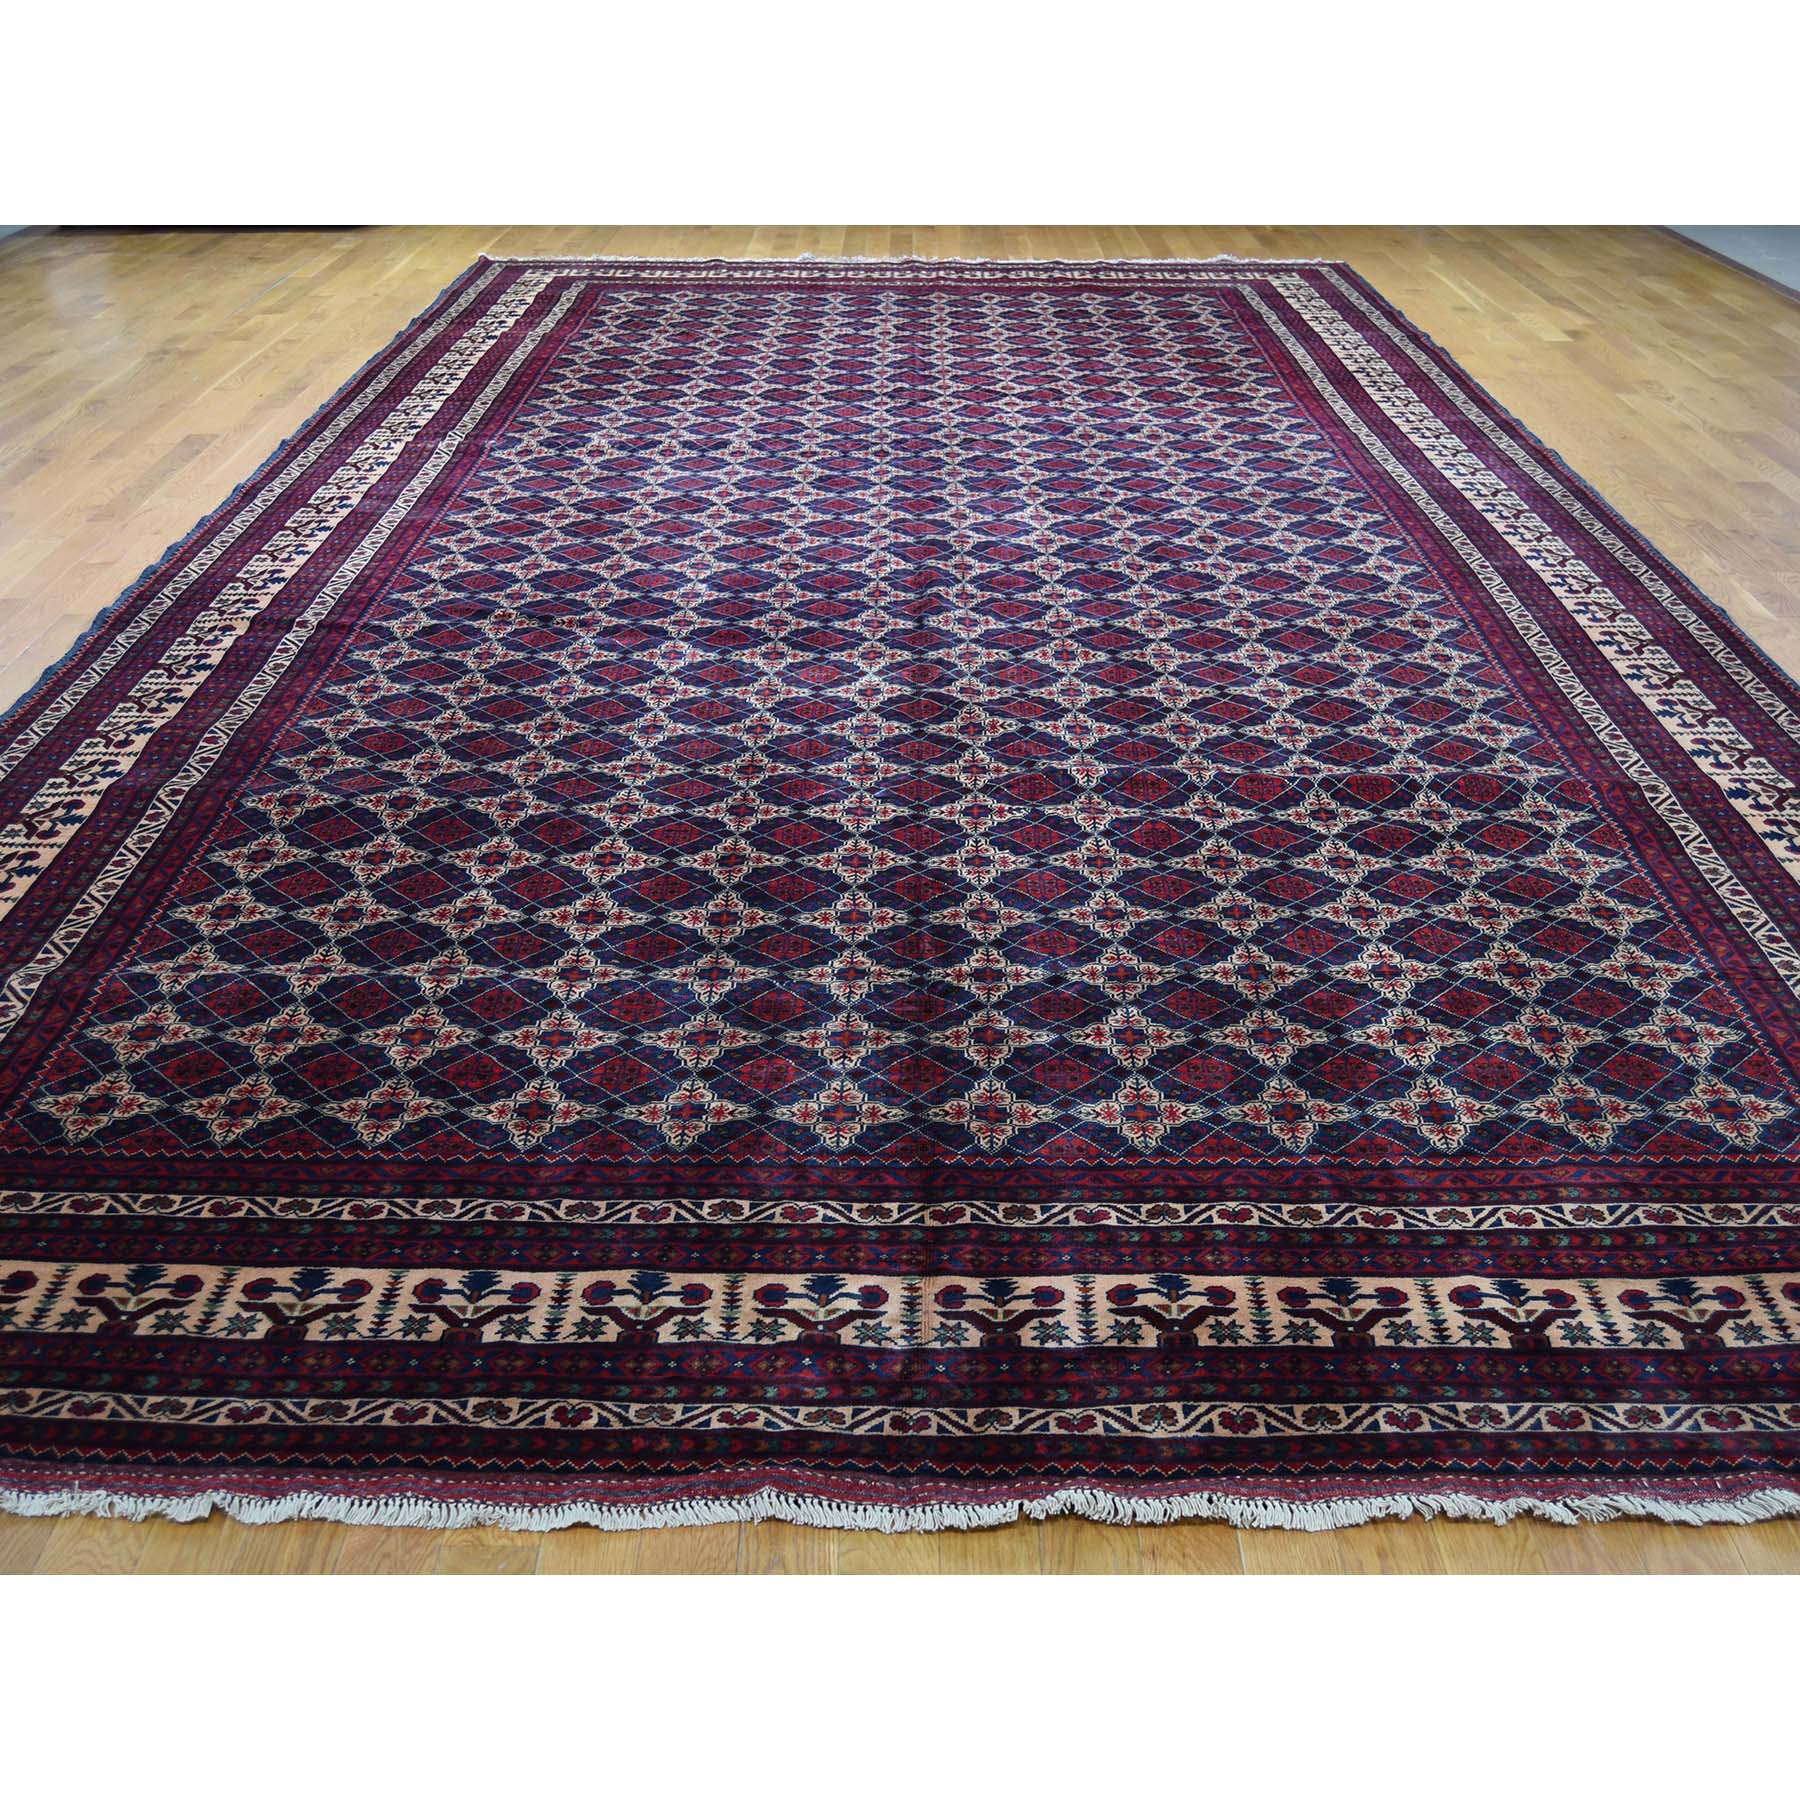 9-9 x19-8  Gallery Size Afghan Khamyab vegetables Dyes Hand Knotted Oriental Rug 